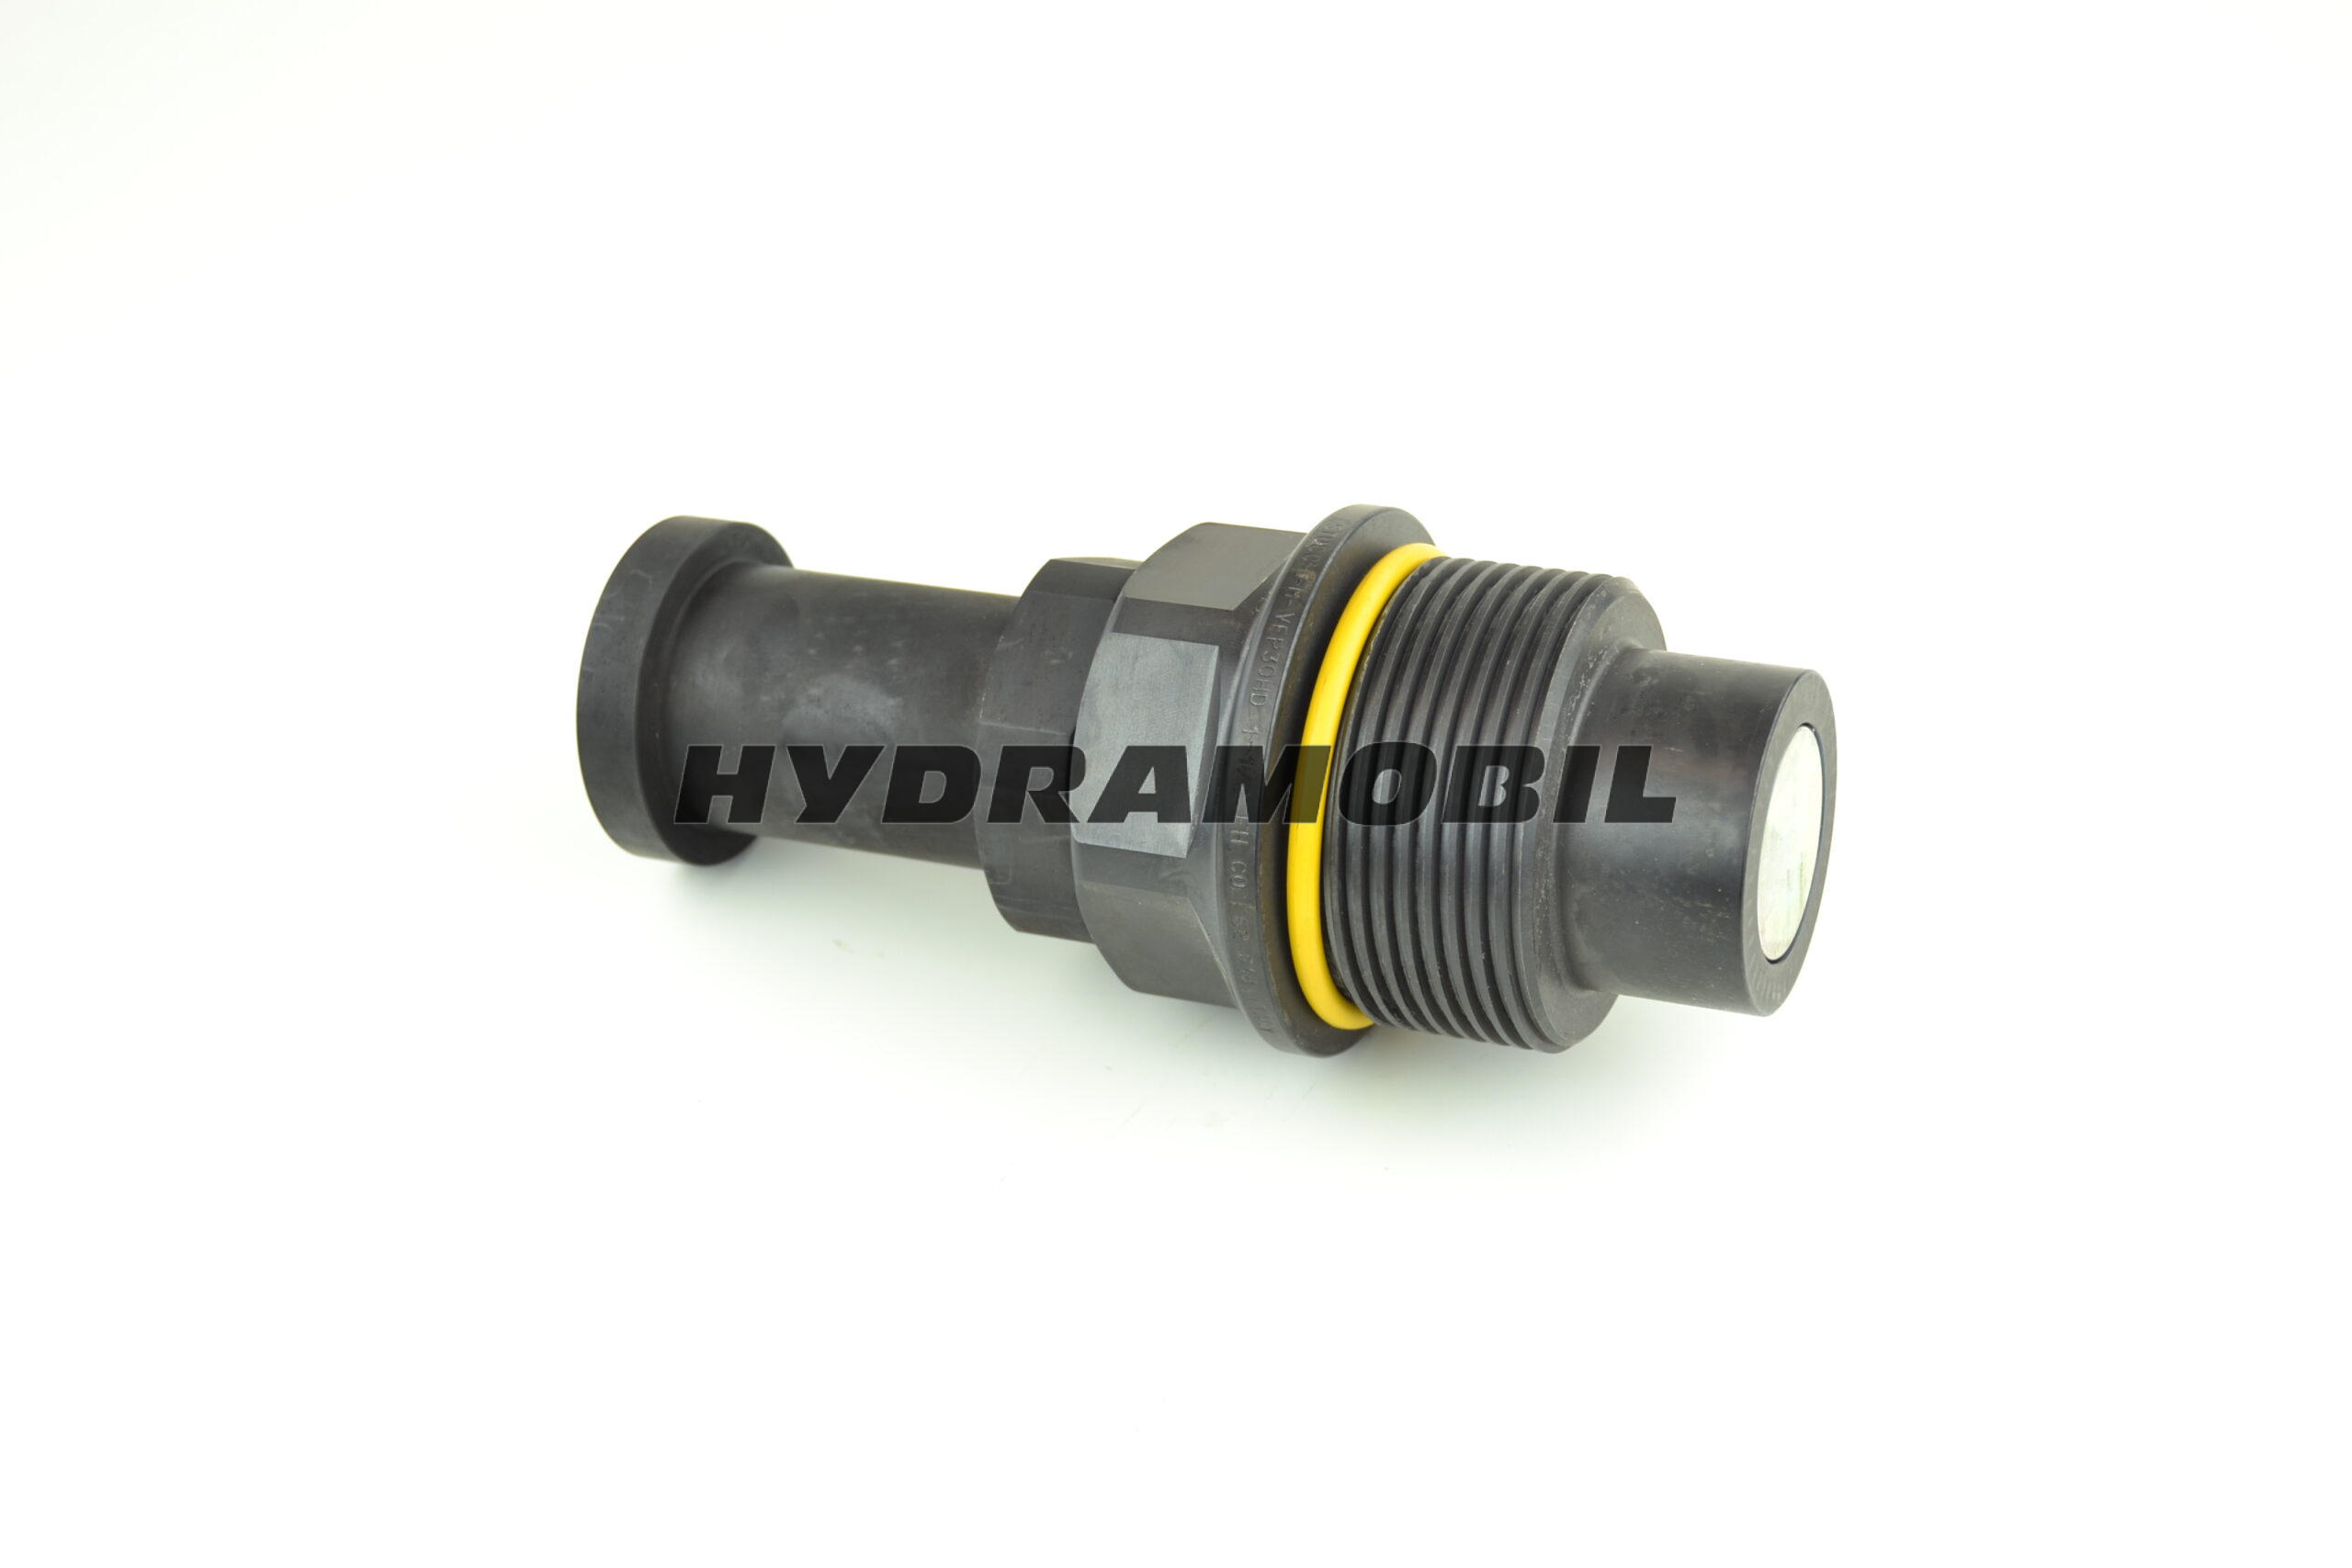 VEP30HD-112-FH-M Skruv snabbkoppling Stucchi Quick Coupling Flat Face Screw Coupling 808124017 Hydramobil